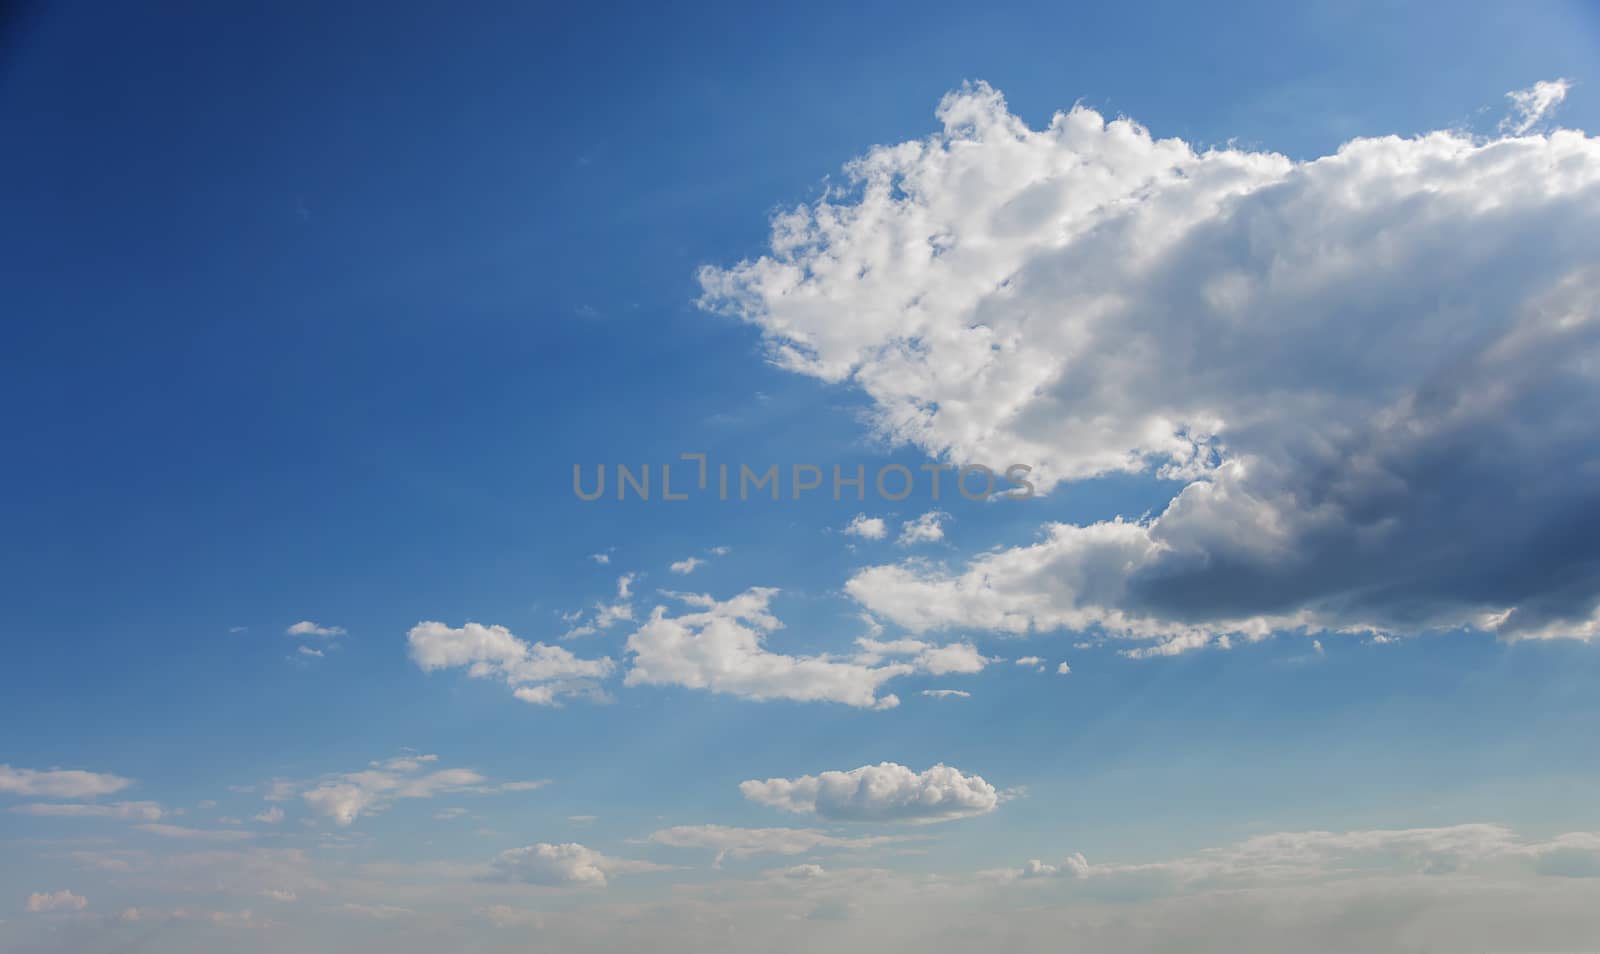 Beautiful natural background: blue sky with white clouds